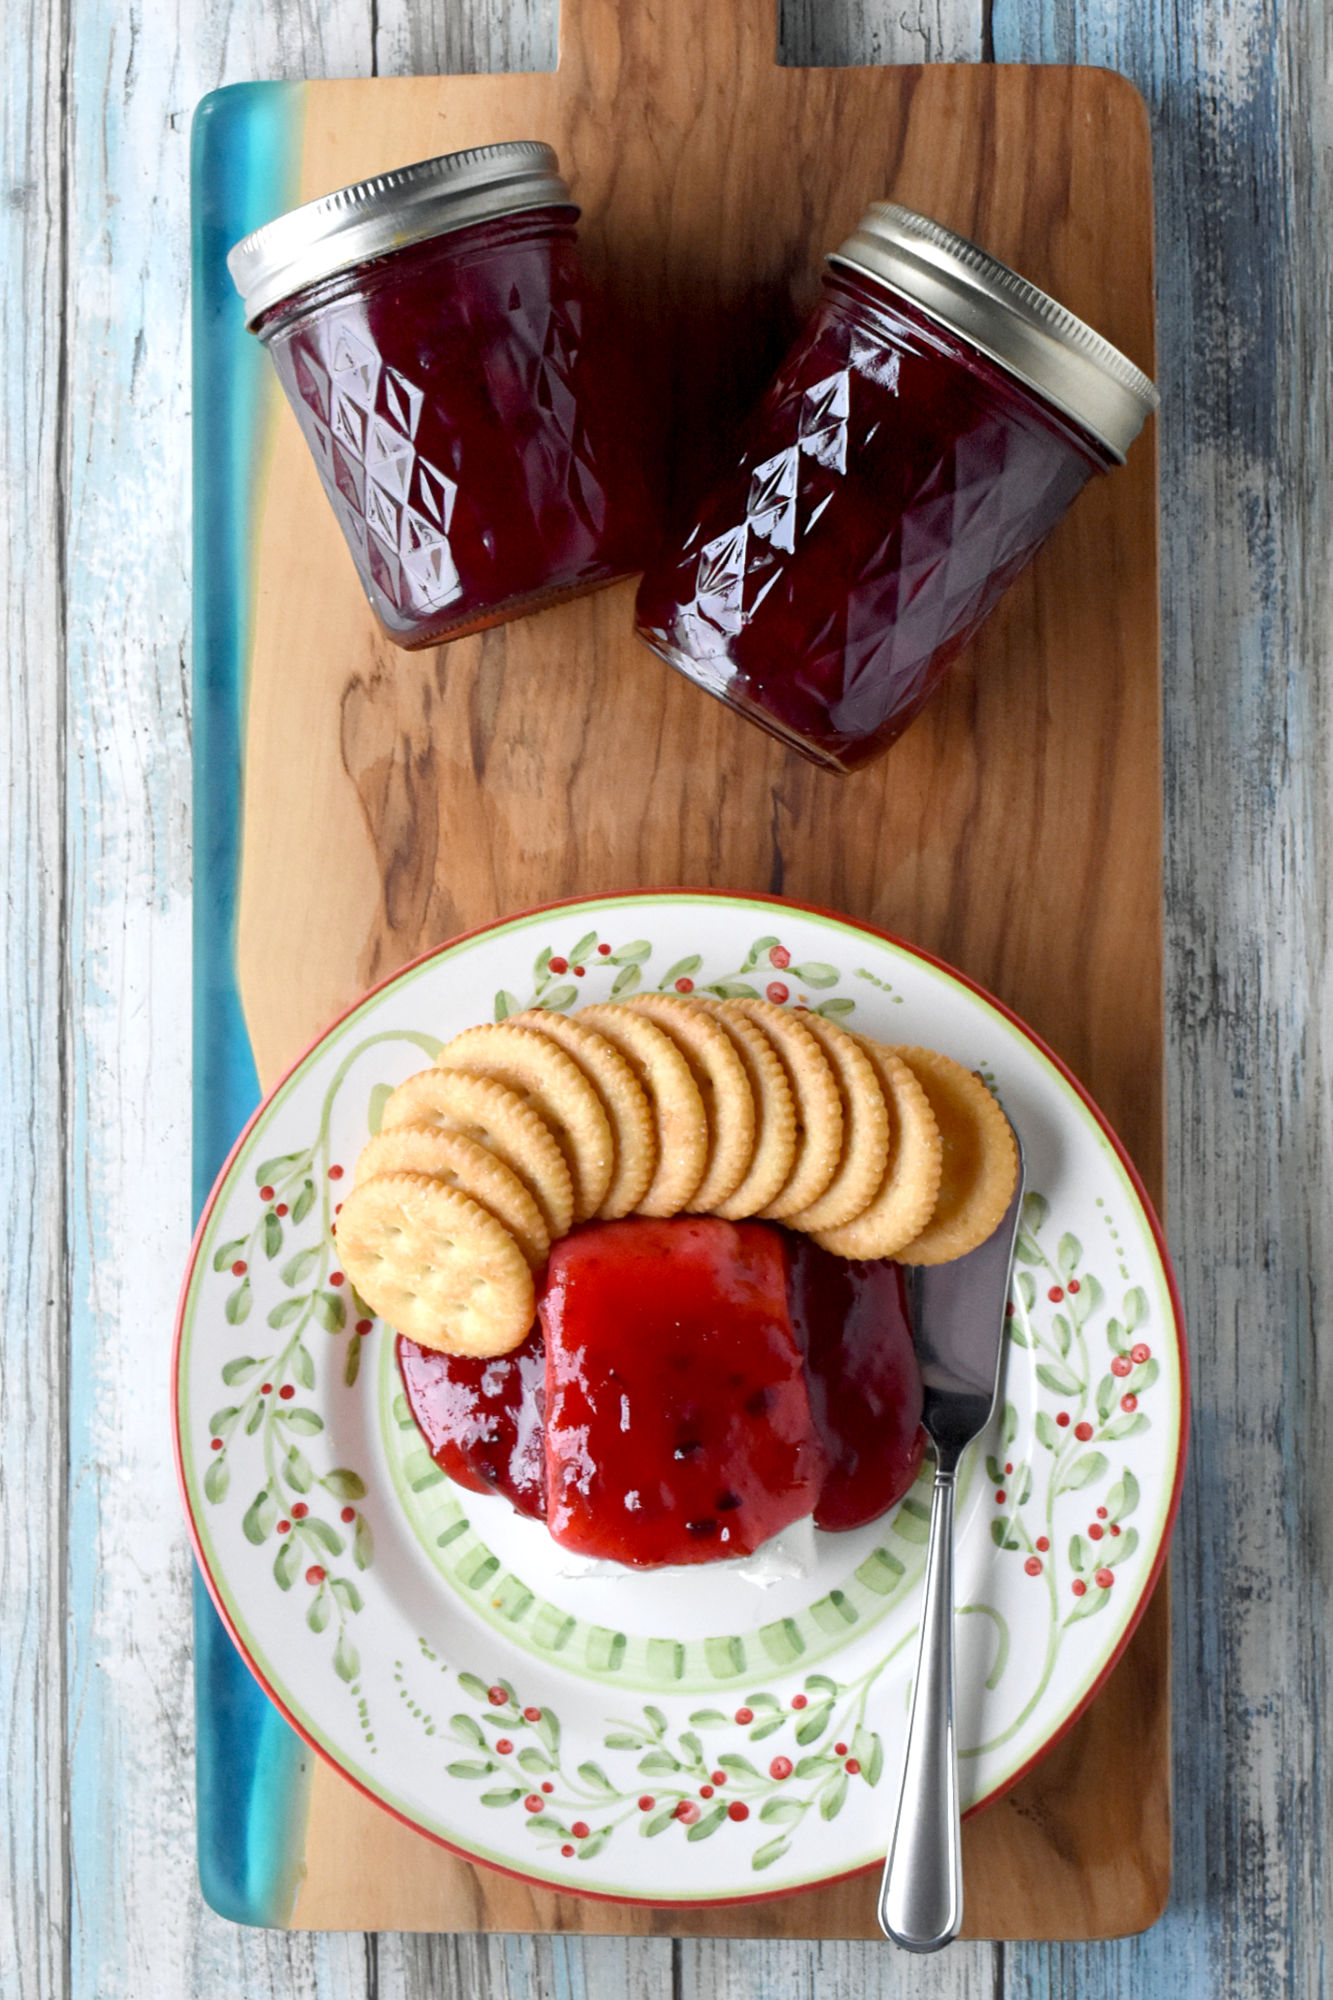 Get ready to spice up your holiday gatherings with this delectable Cranberry Hot Pepper Jelly.  It will have your guests talking and become a must-have on your holiday menu. #CranberryJelly #HotPepperJelly #CranberrySpice #HomemadePreserves #SmallBatchJamsAndJellies
